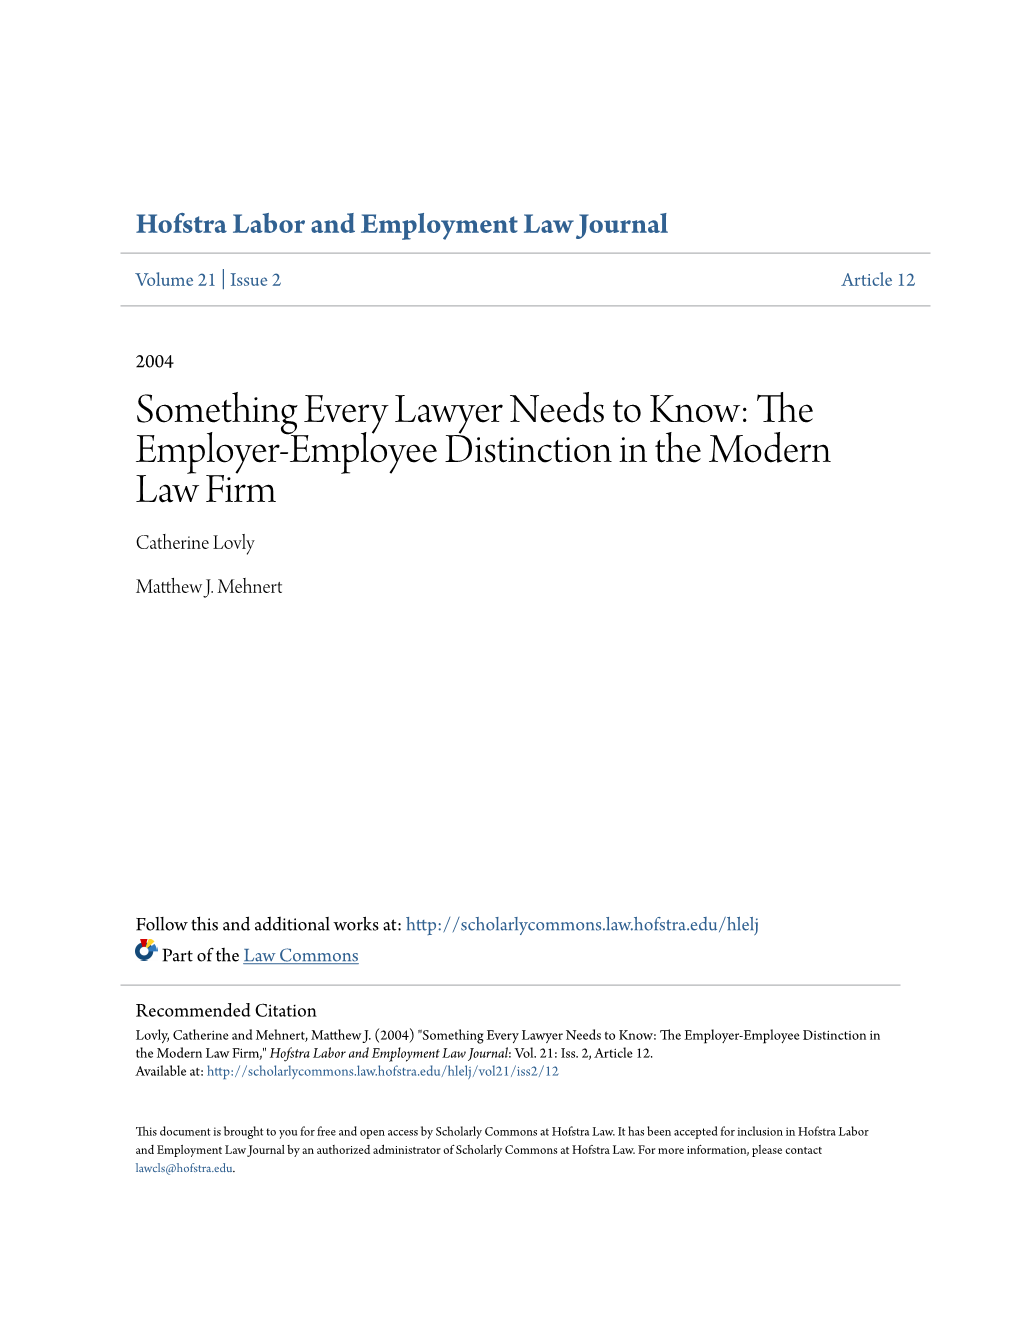 Something Every Lawyer Needs to Know: the Employer-Employee Distinction in the Modern Law Firm Catherine Lovly